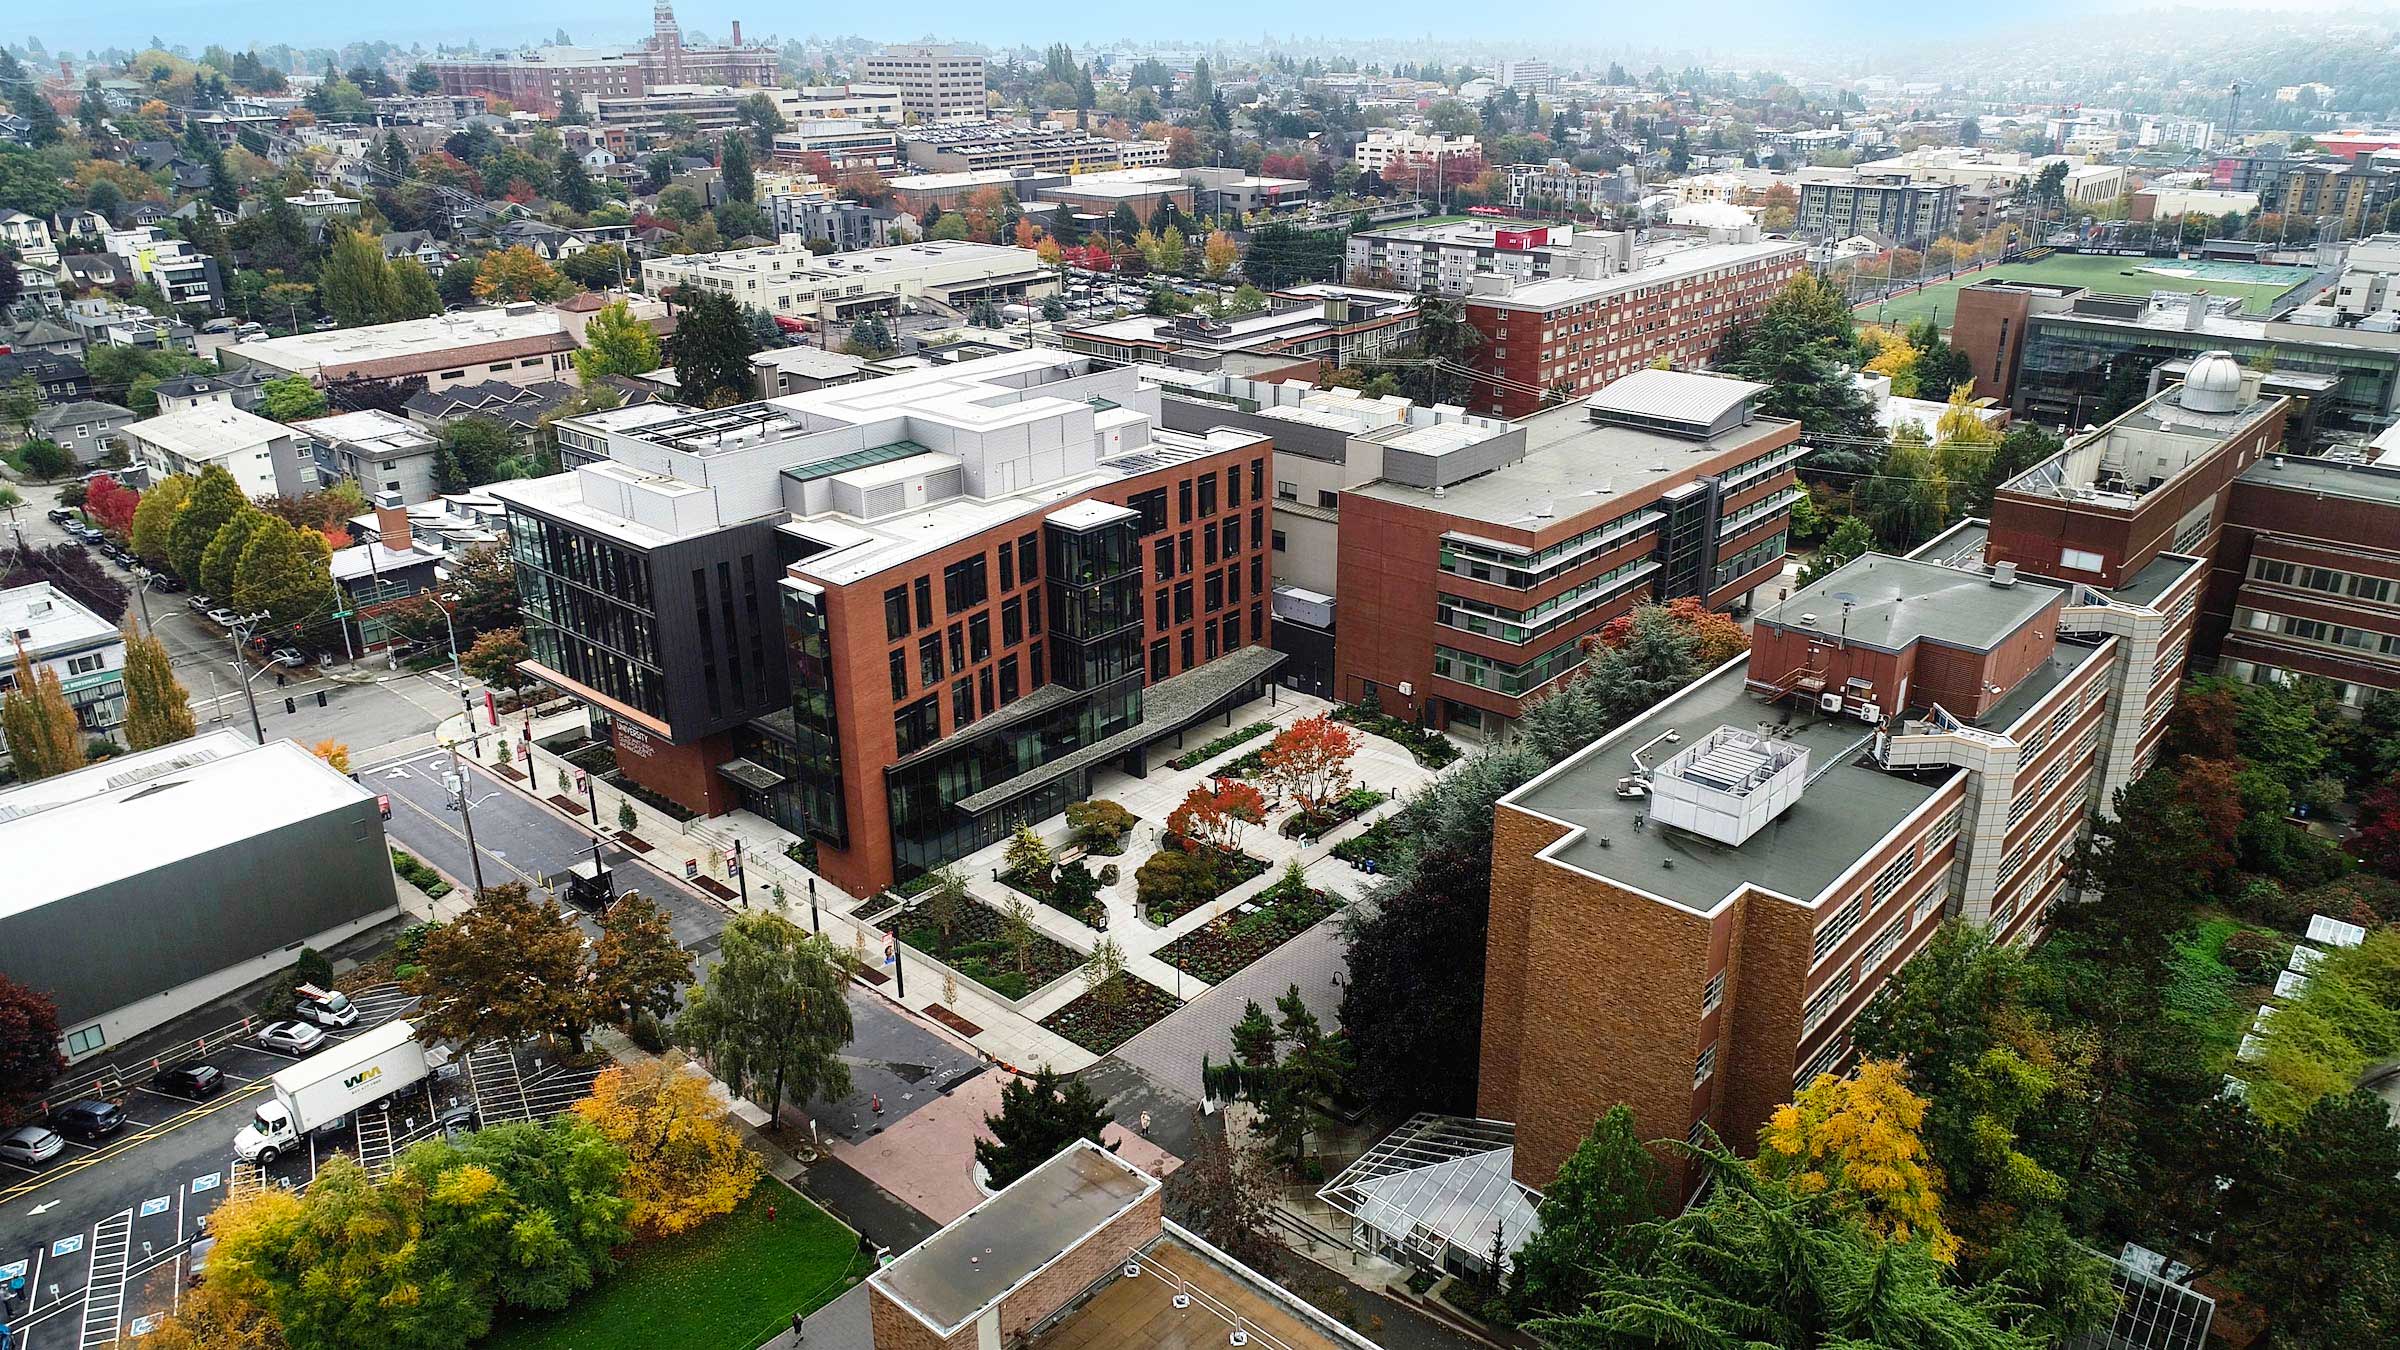 An aerial view of Seattle University's campus featuring the new Sinegal Center building and the neighborhoods beyond.